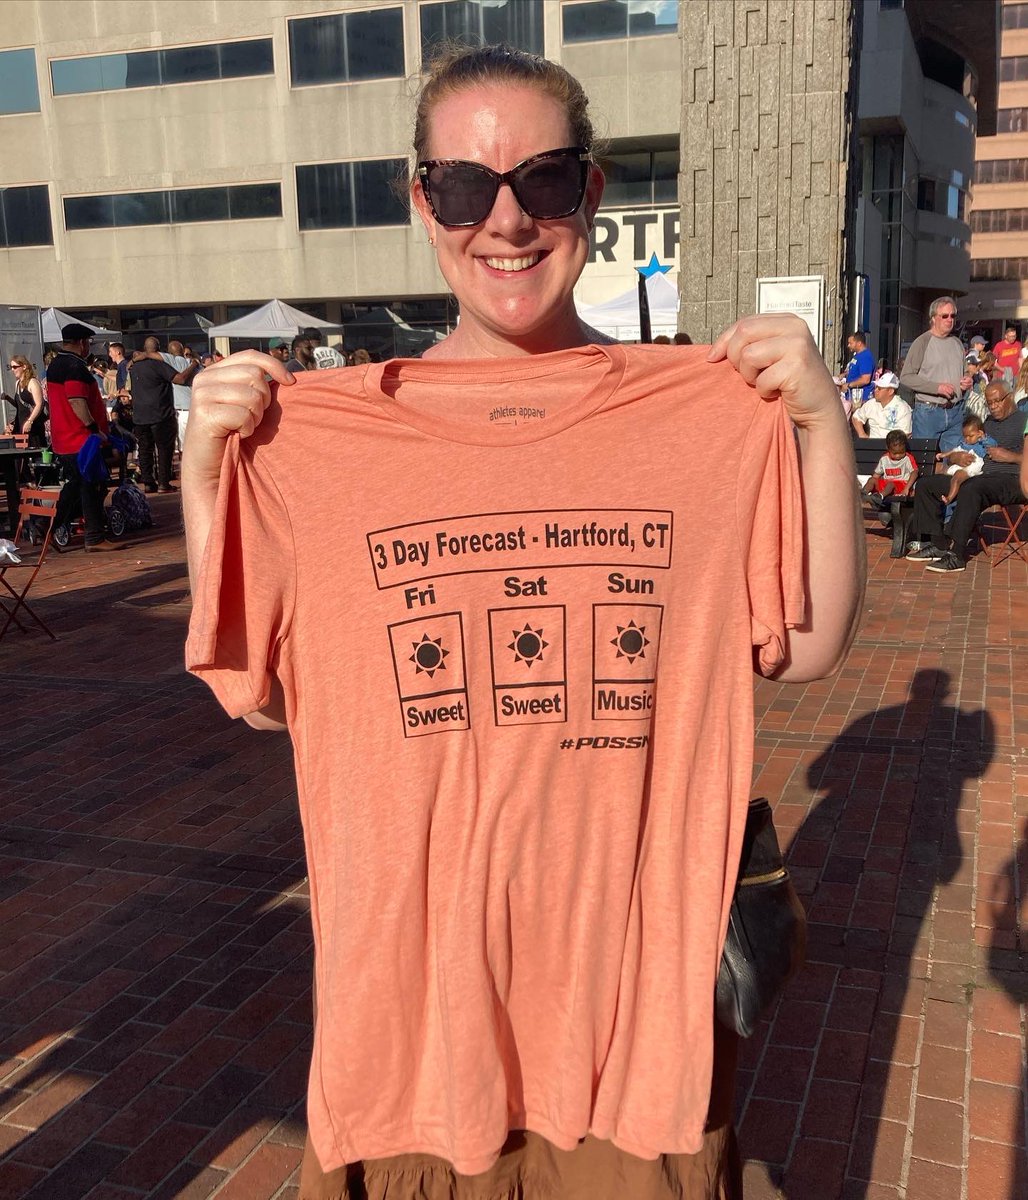 #Possm T’s a big hit at the #Hartford Taste Festival! We are almost out, ordering more for our next few shows. Get your comfy possm on! #localmusic #loveyourcity #ctlife